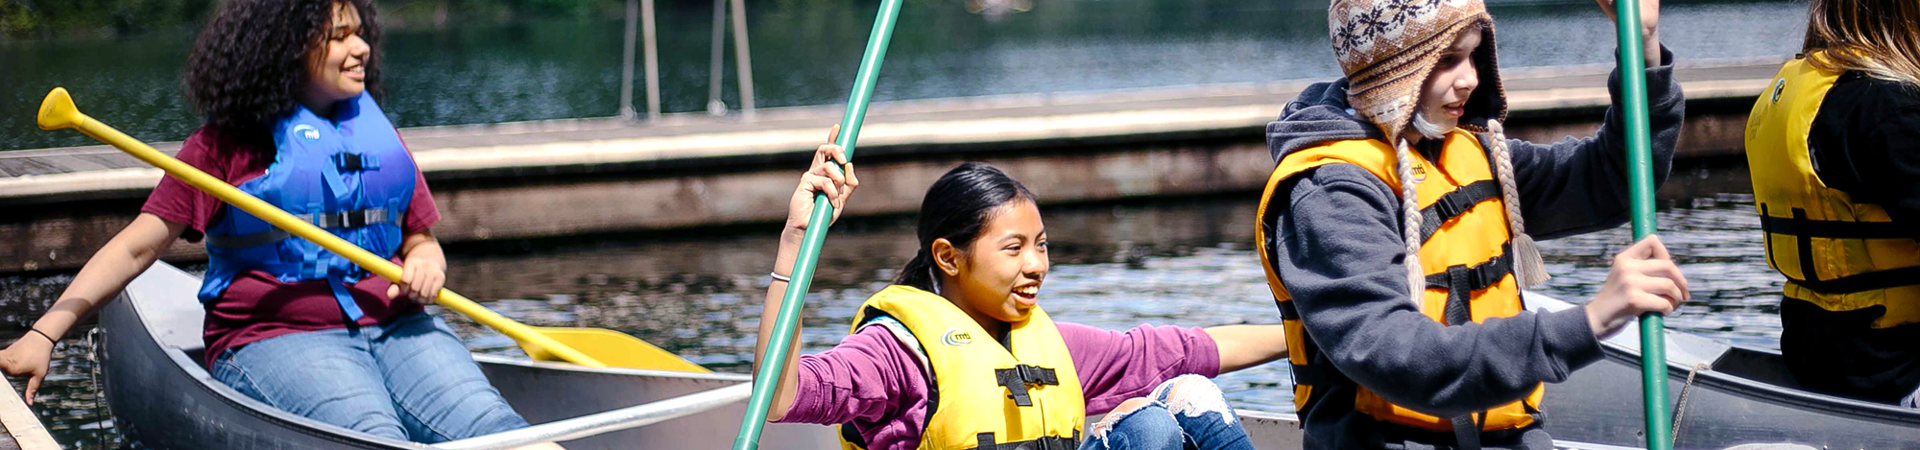  Three Girl Scouts paddle in a canoe on a lake with a dock in the background. 